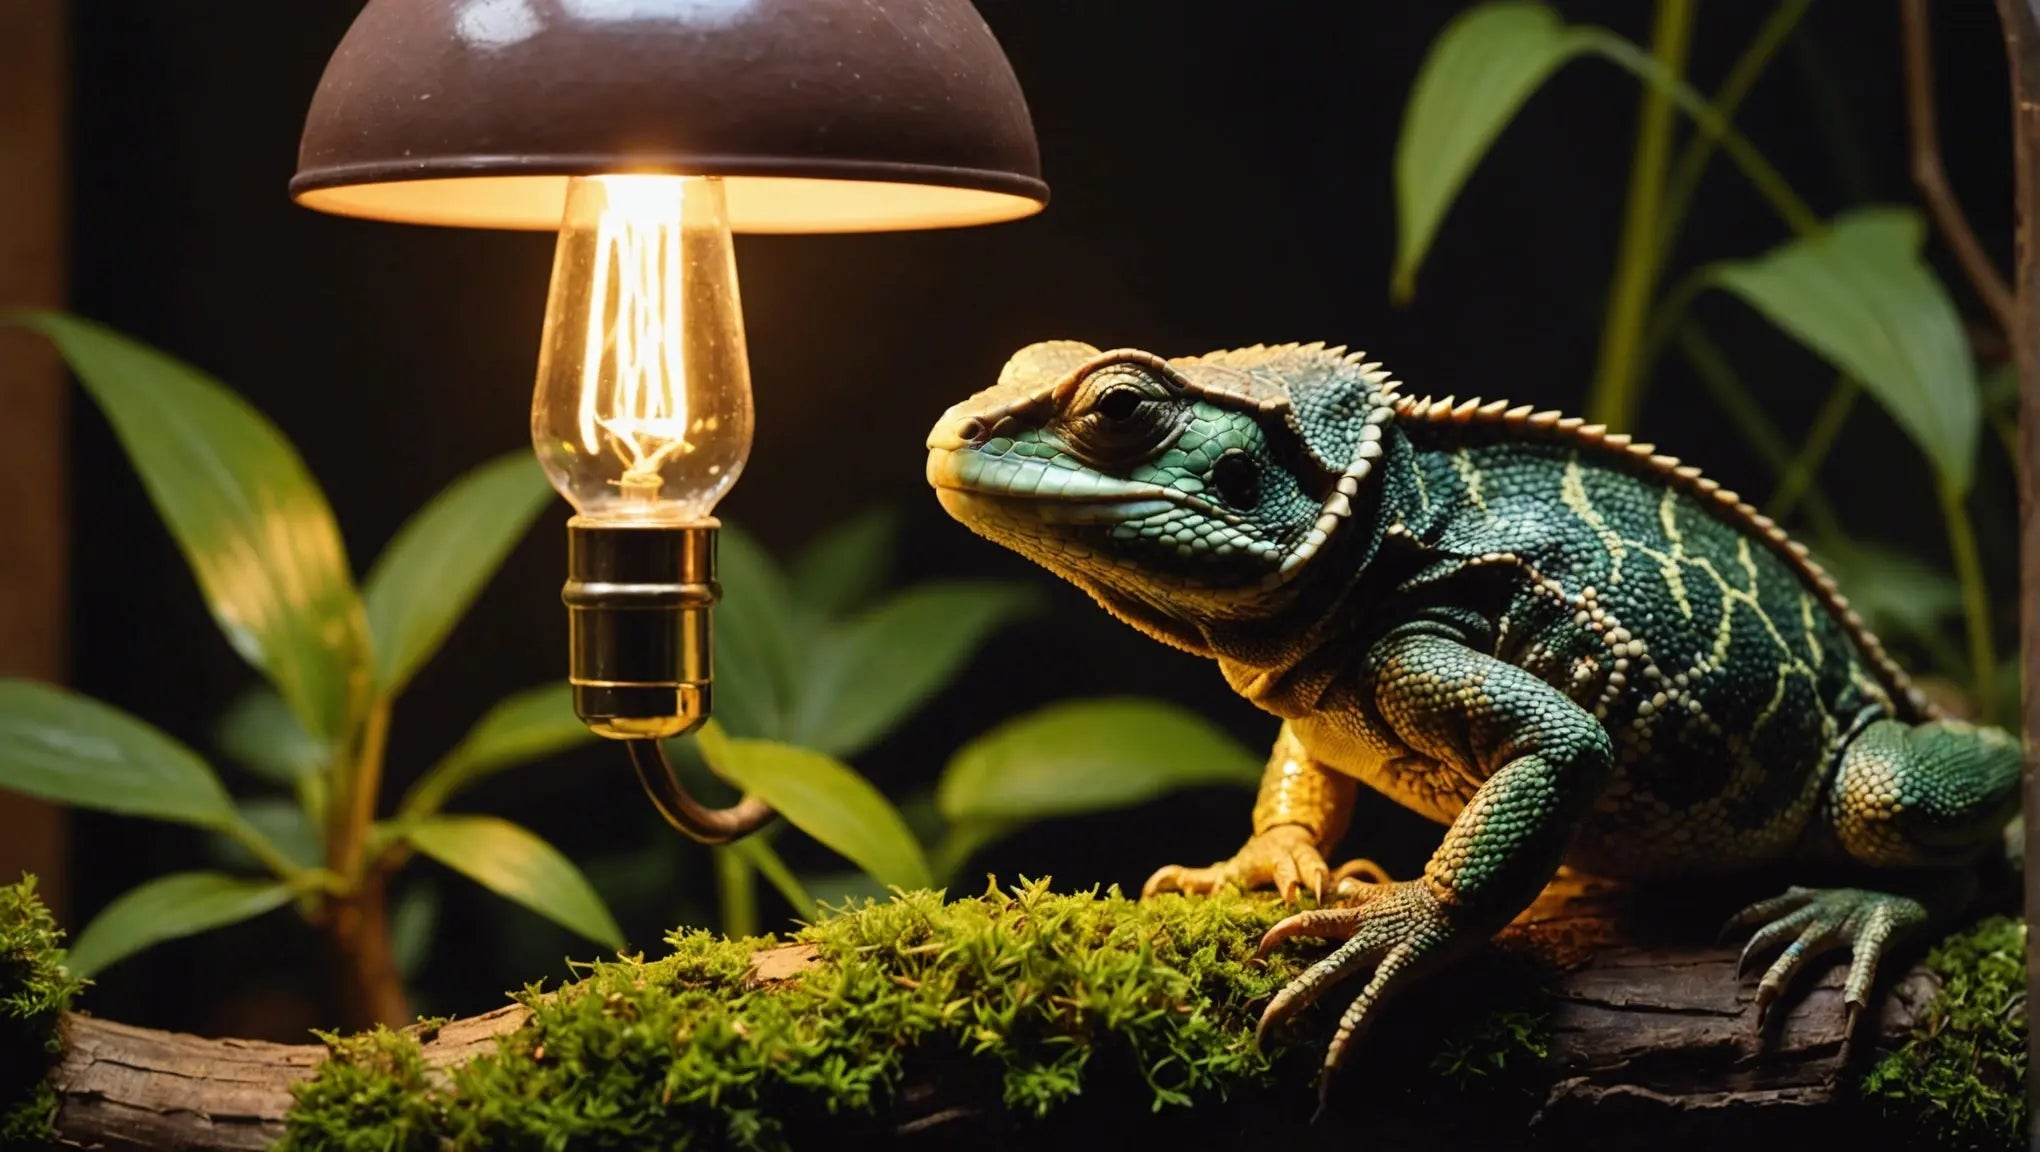 Keep Your Reptile Warm with a Ceramic Heat Lamp